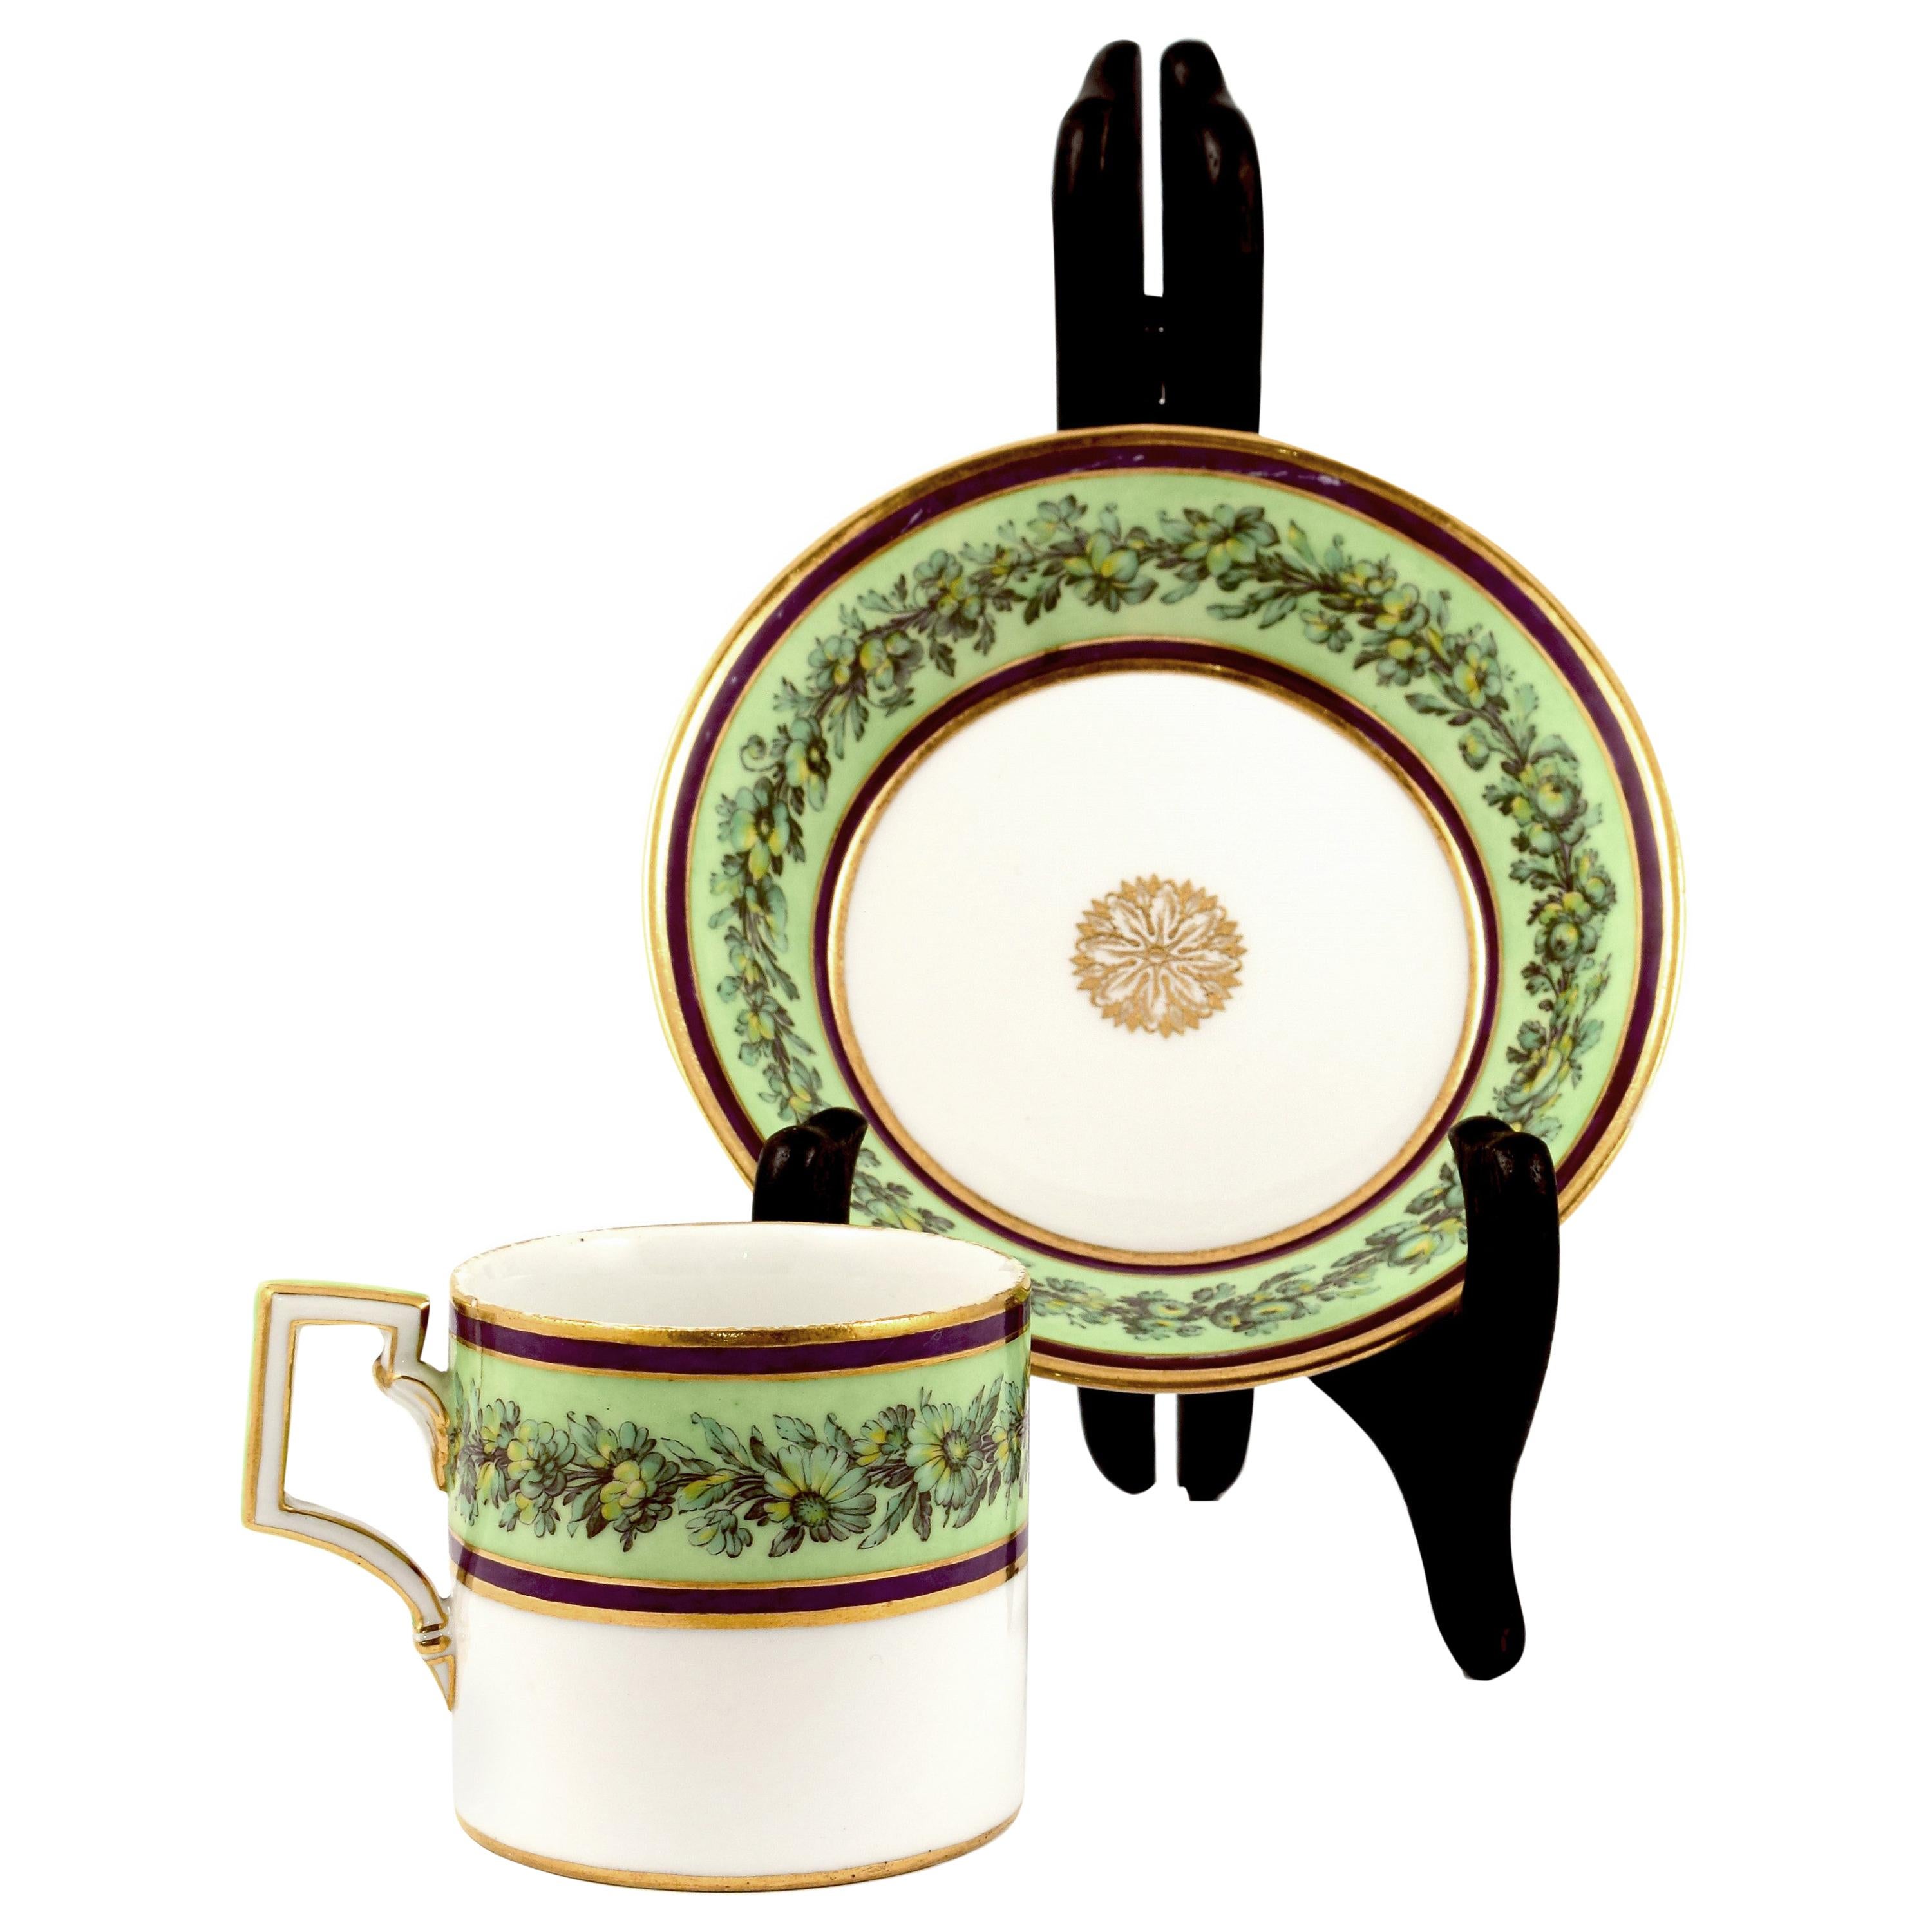 KPM Empire Porcelain Cup and Saucer Decorated with a Green Flower Border